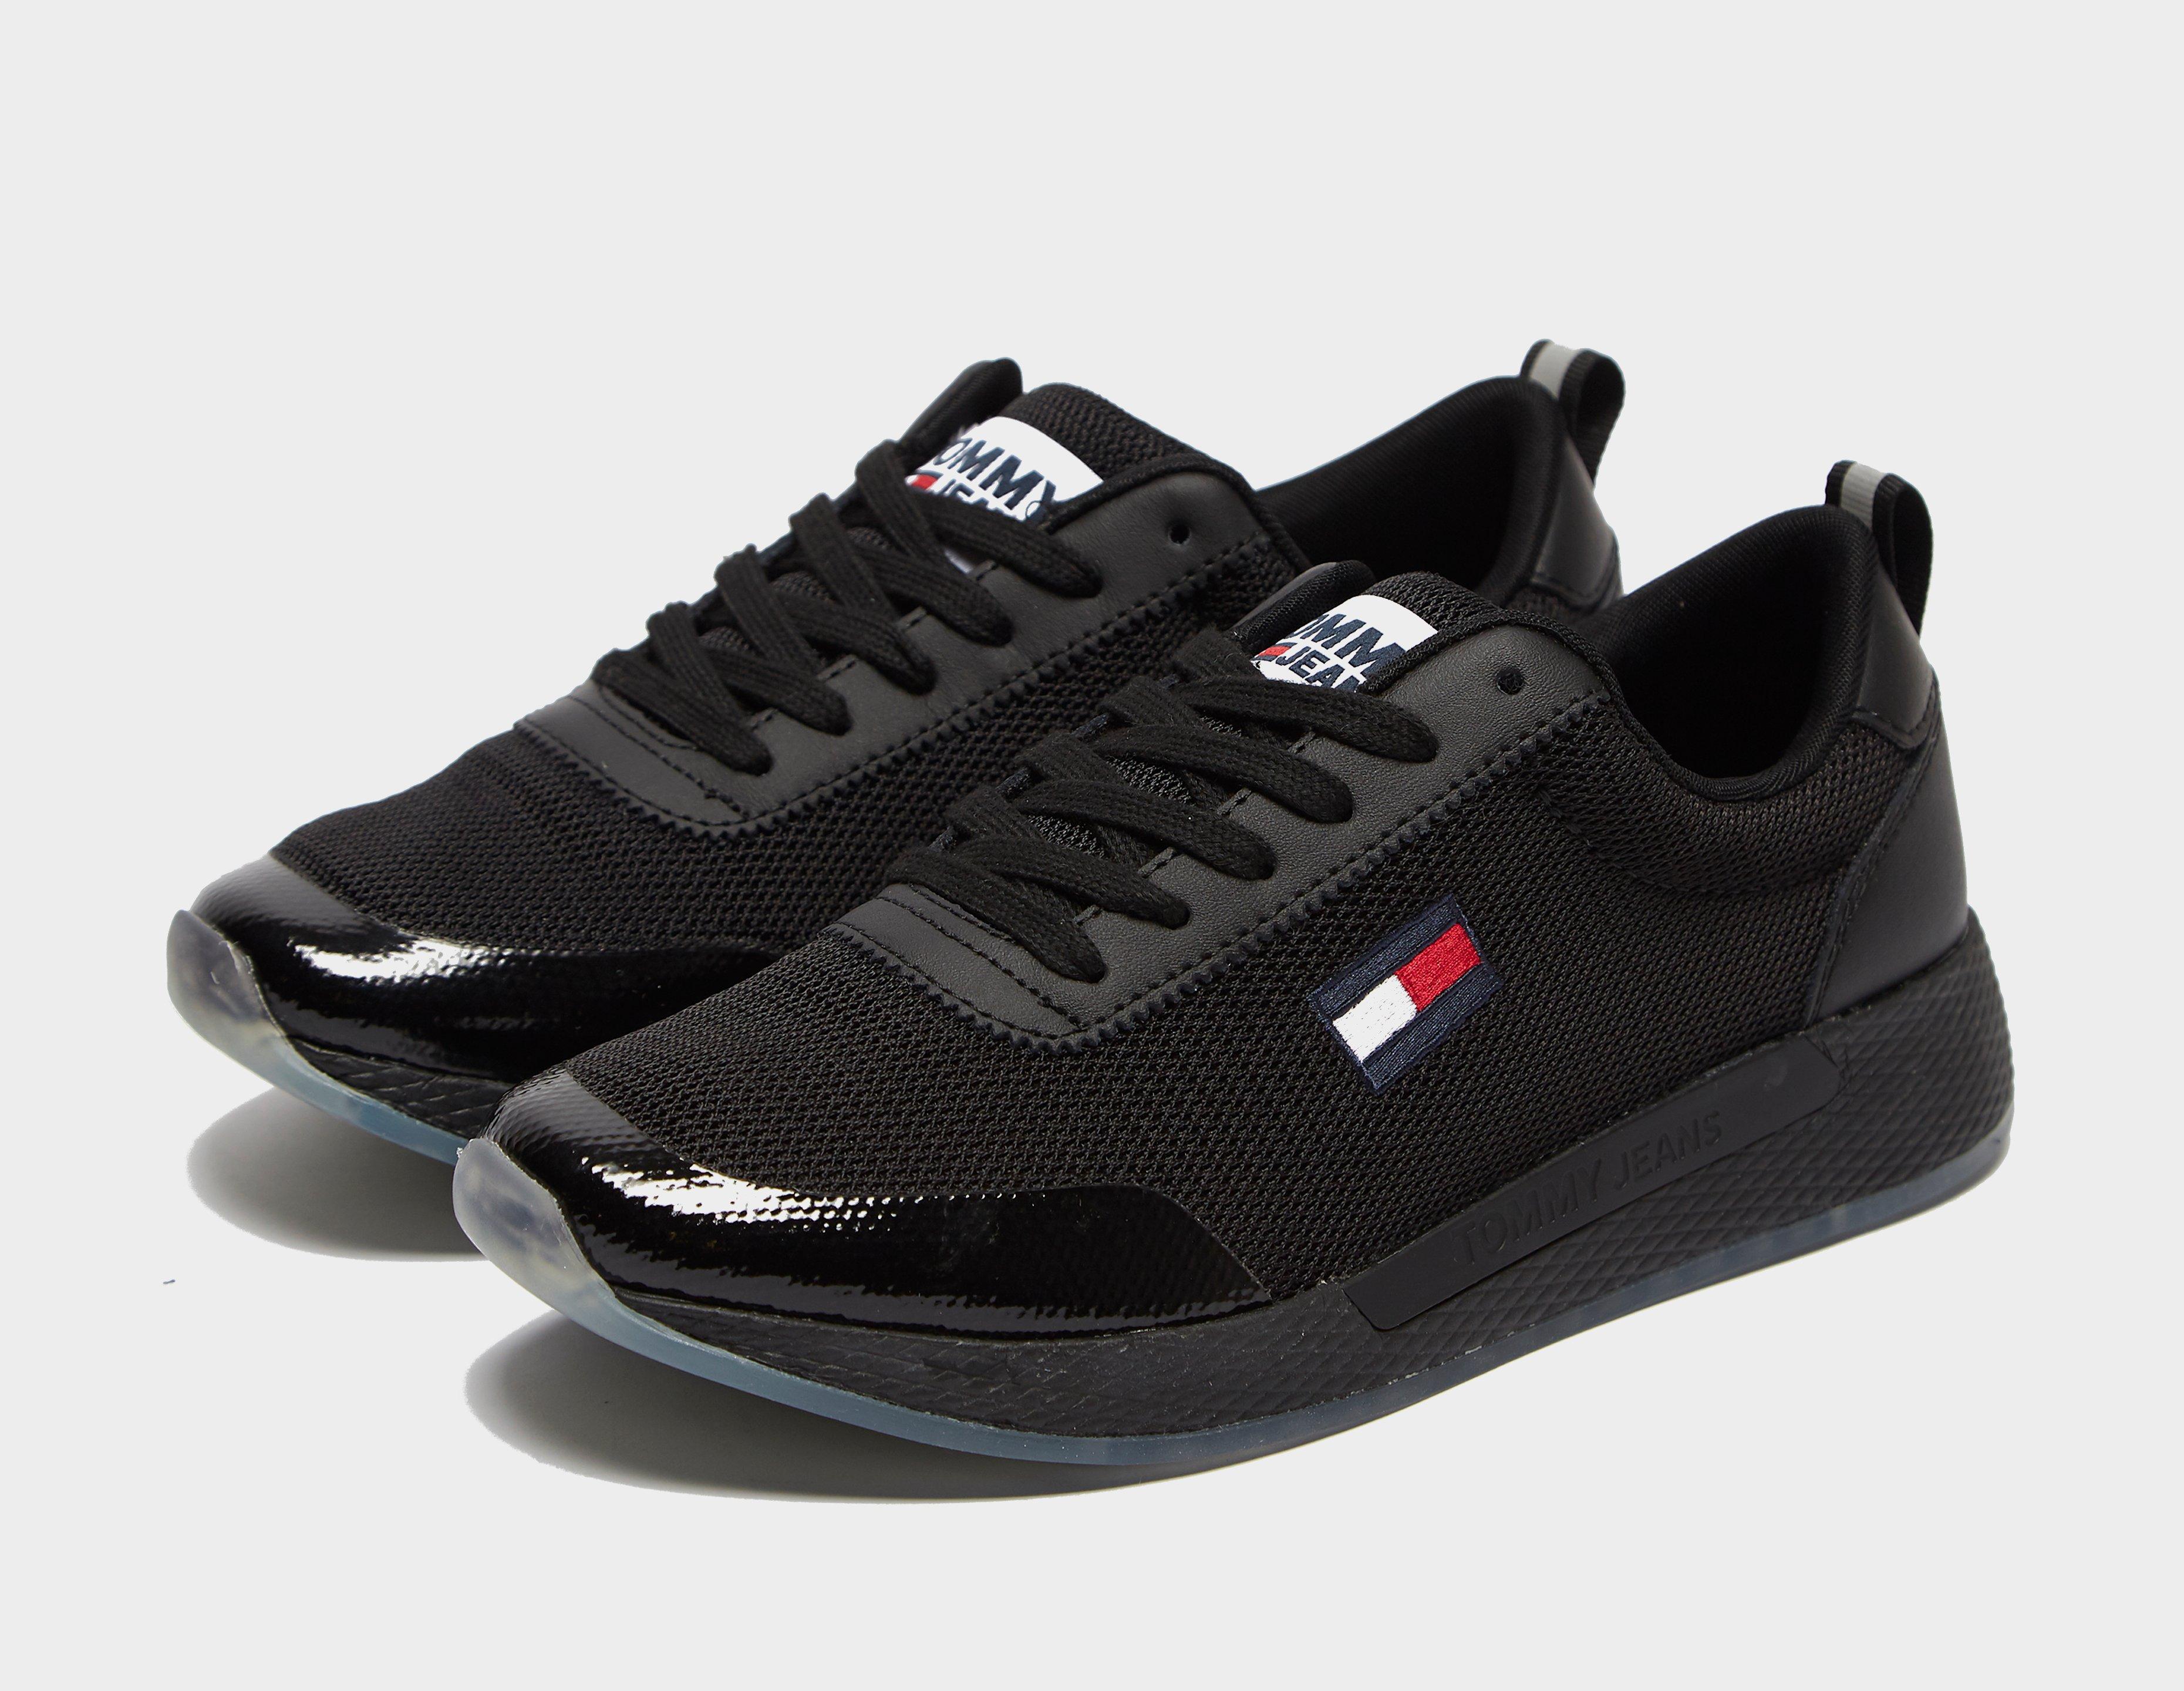 tommy hilfiger black trainers womens